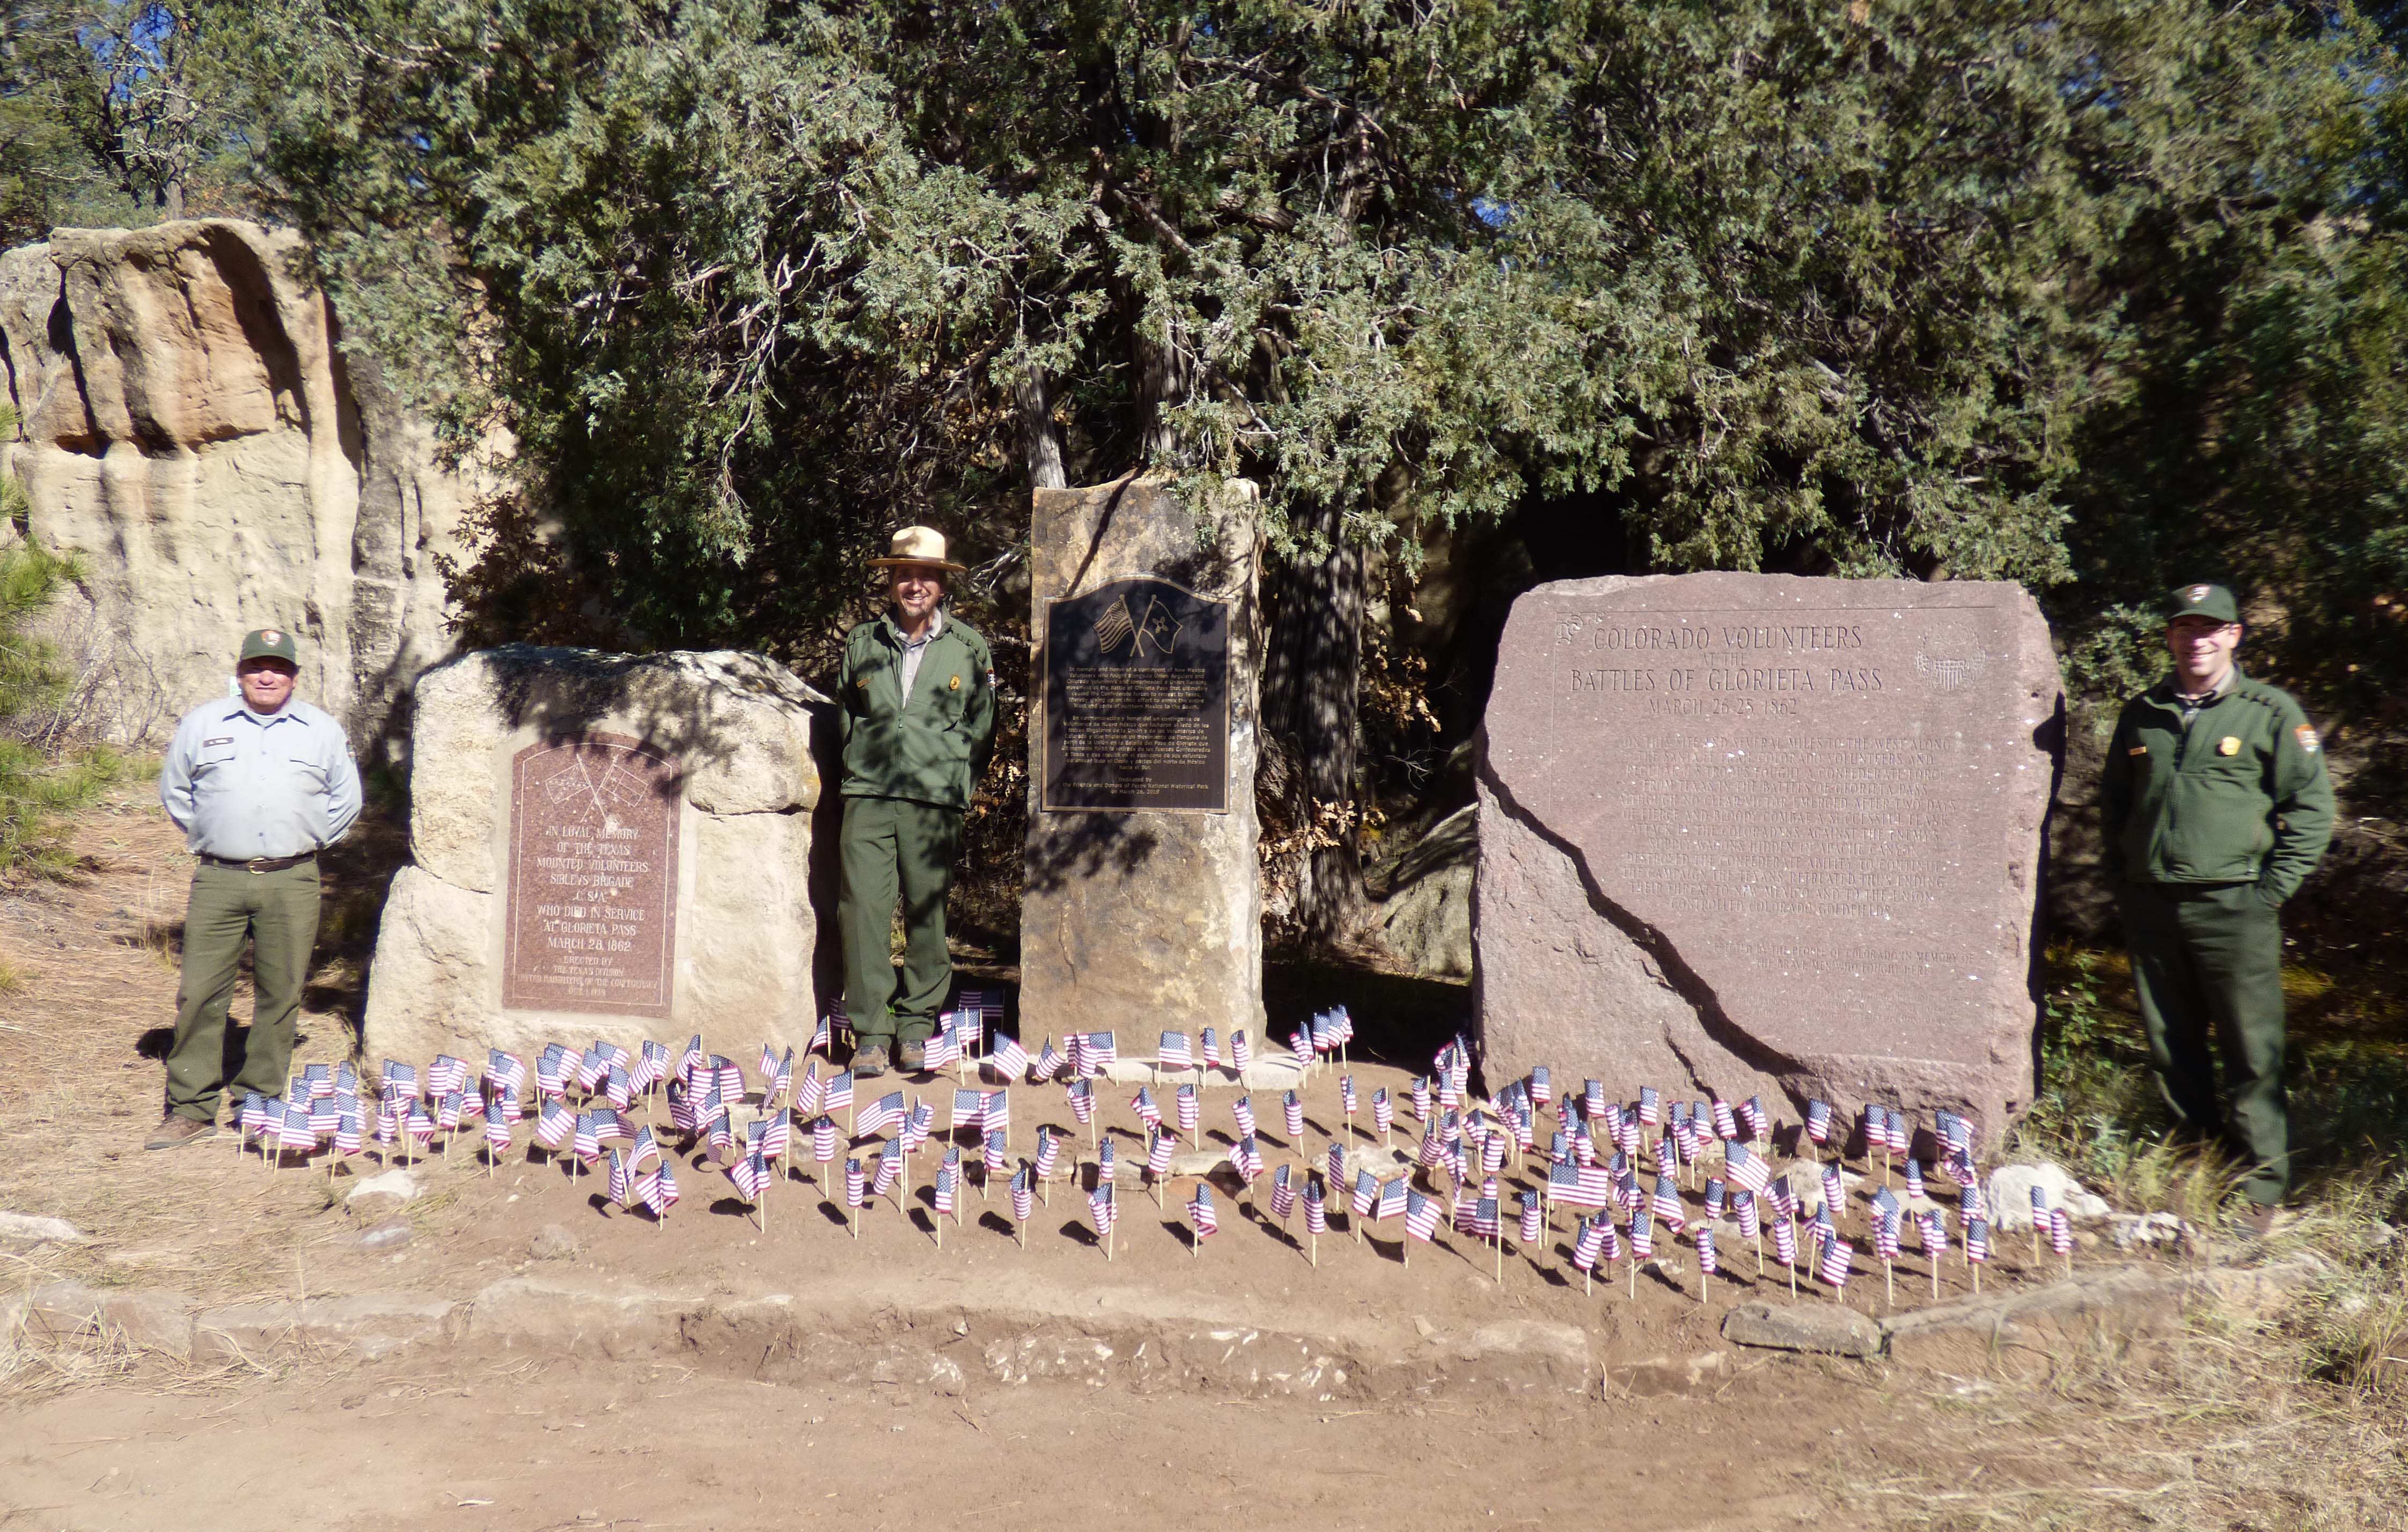 American flags around stone monuments with rangers in between monuments.